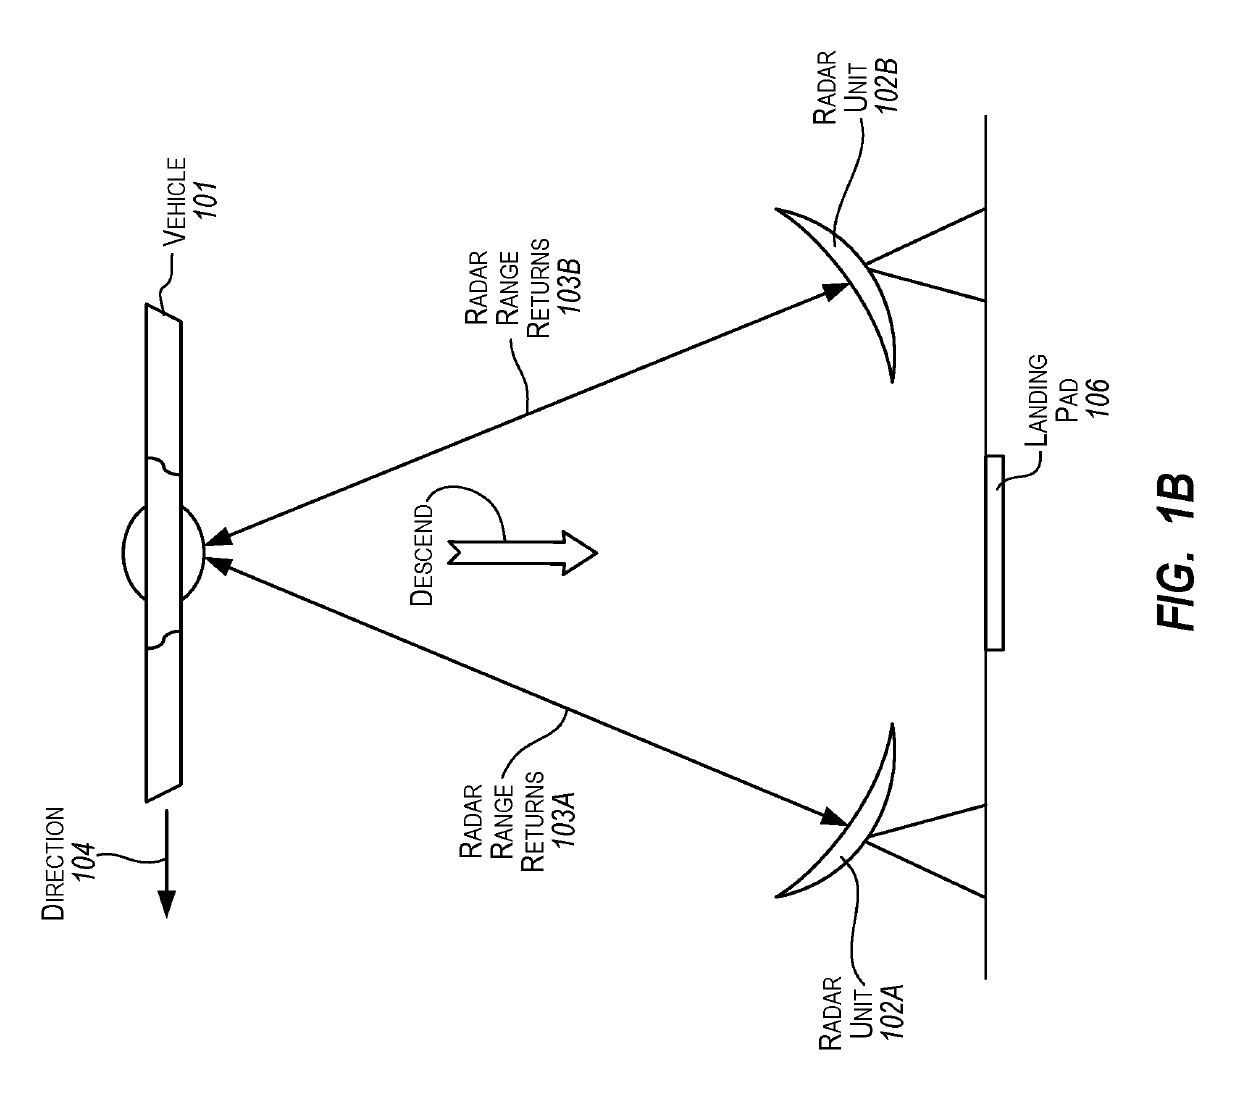 Landing guidance for remotely operated aerial vehicles using crossed radar beams